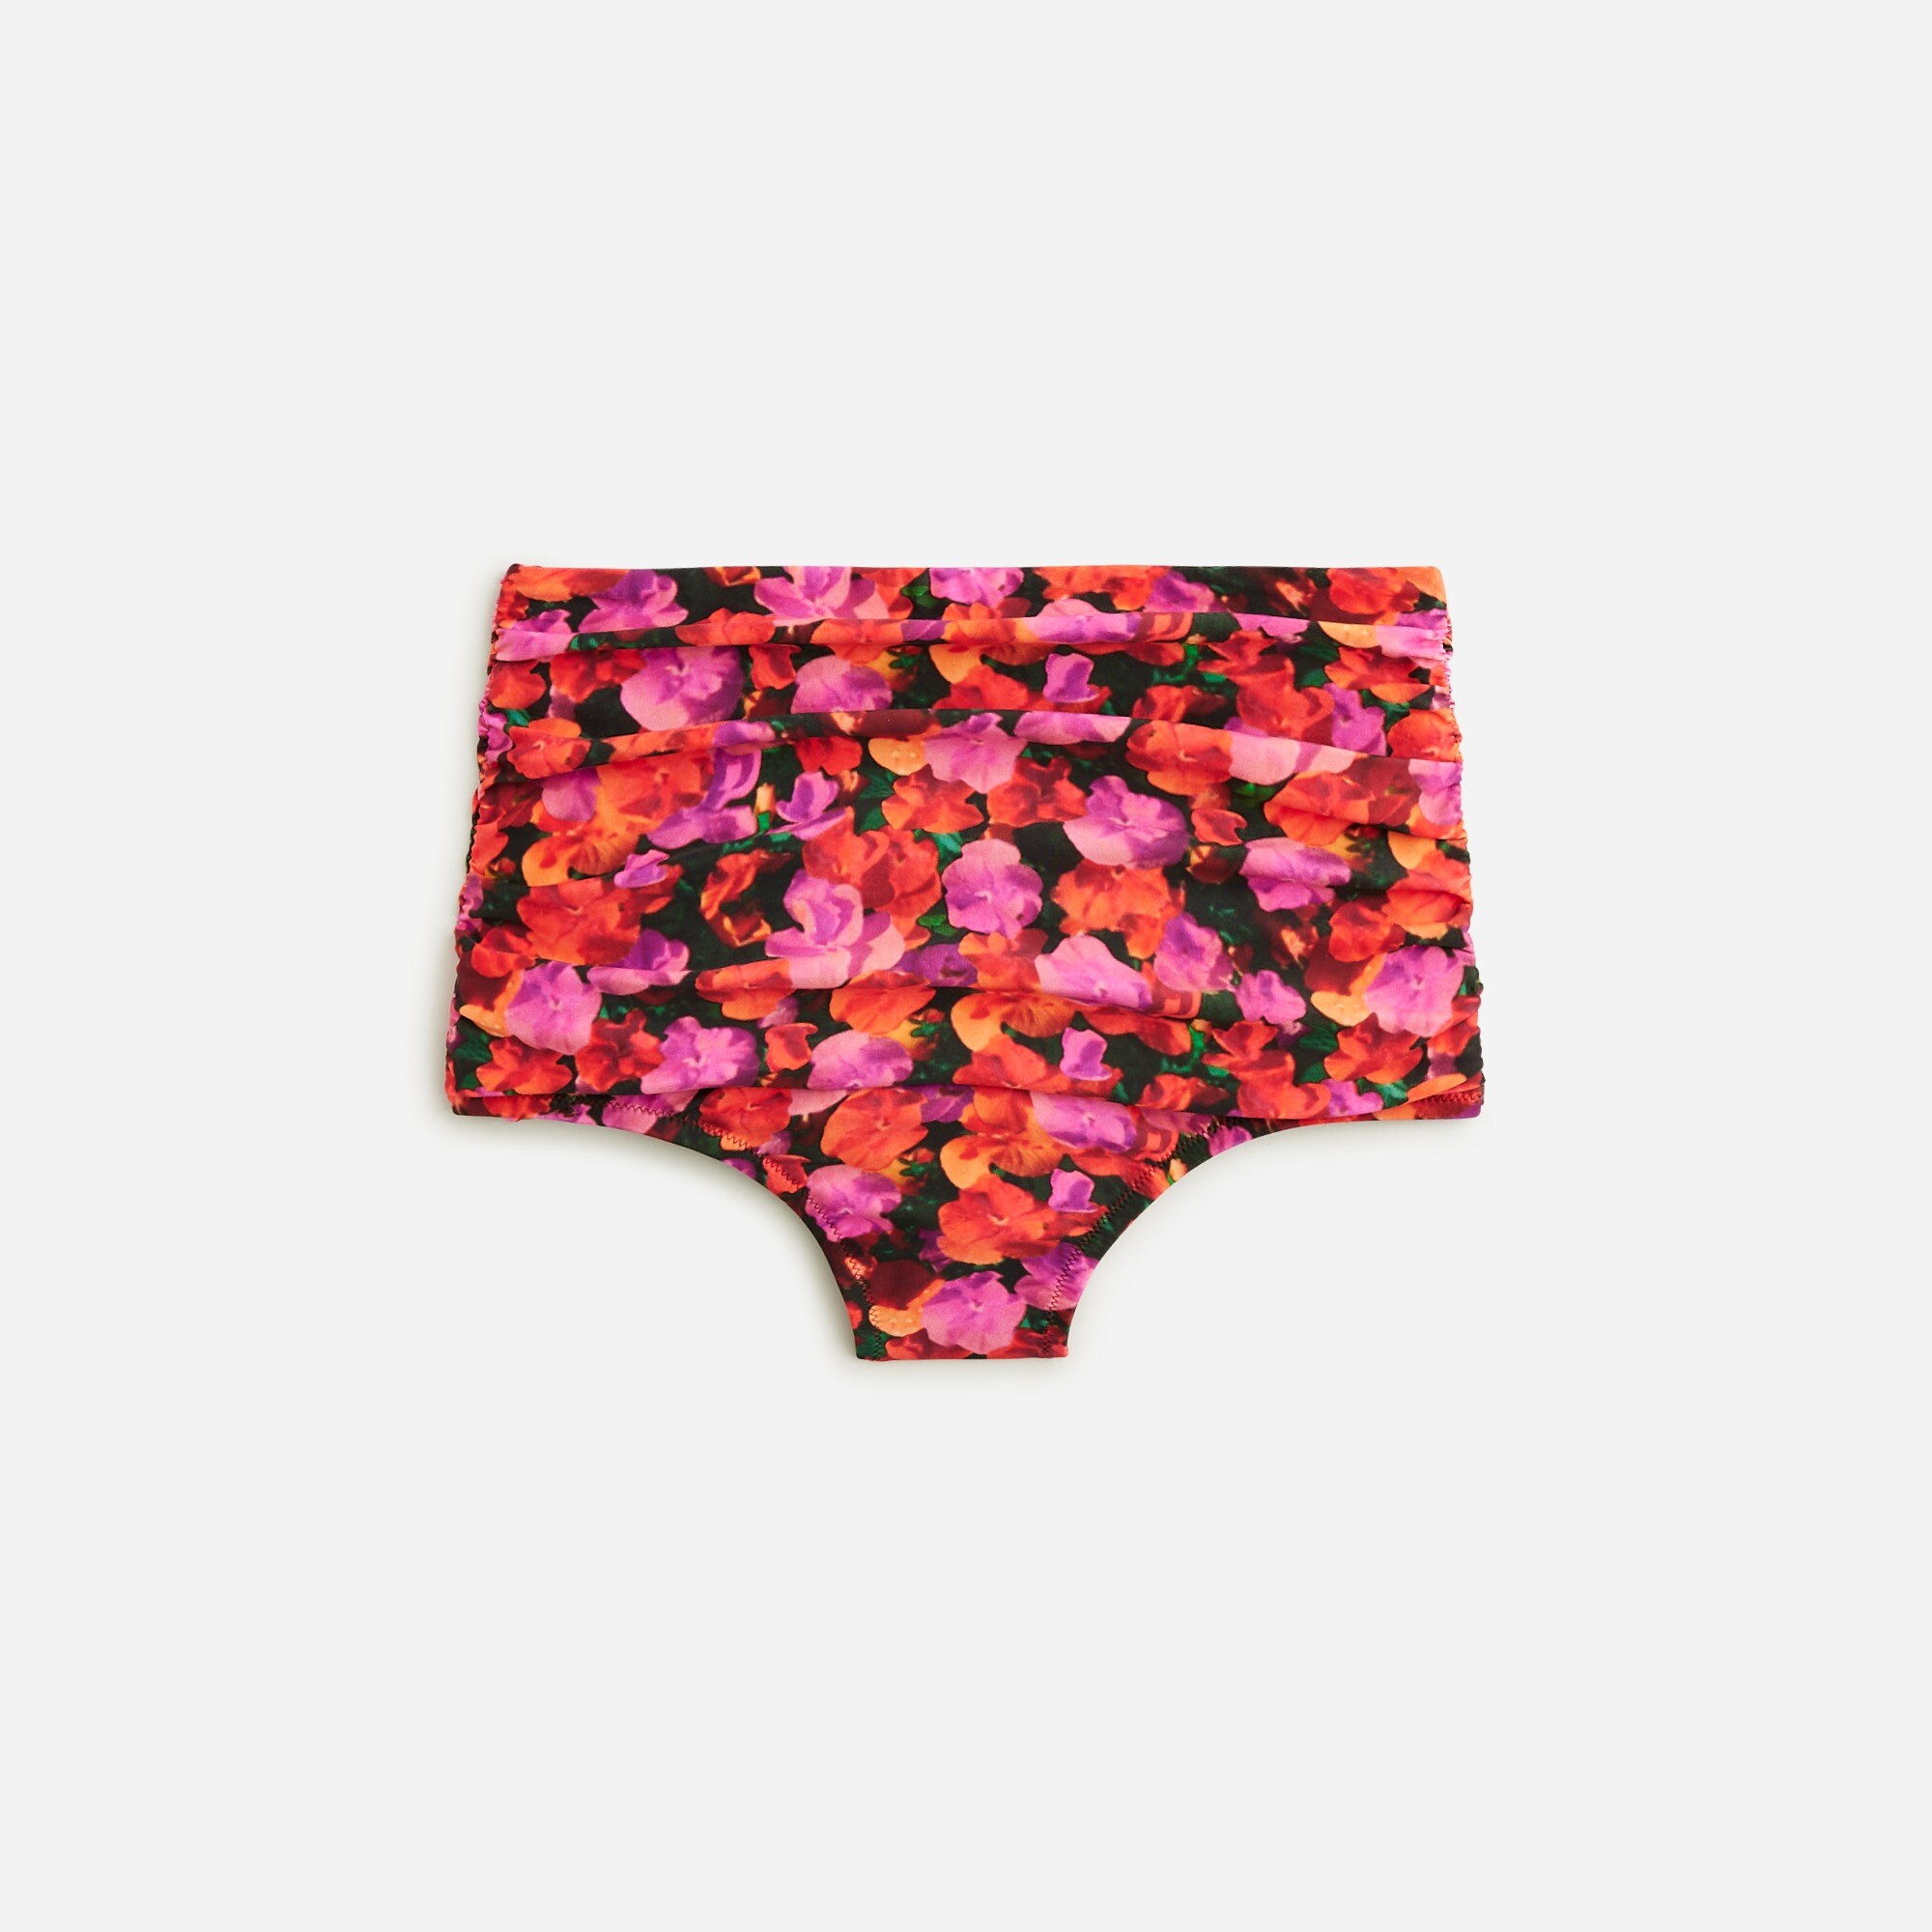  Ruched high-rise bikini bottom in pansy floral